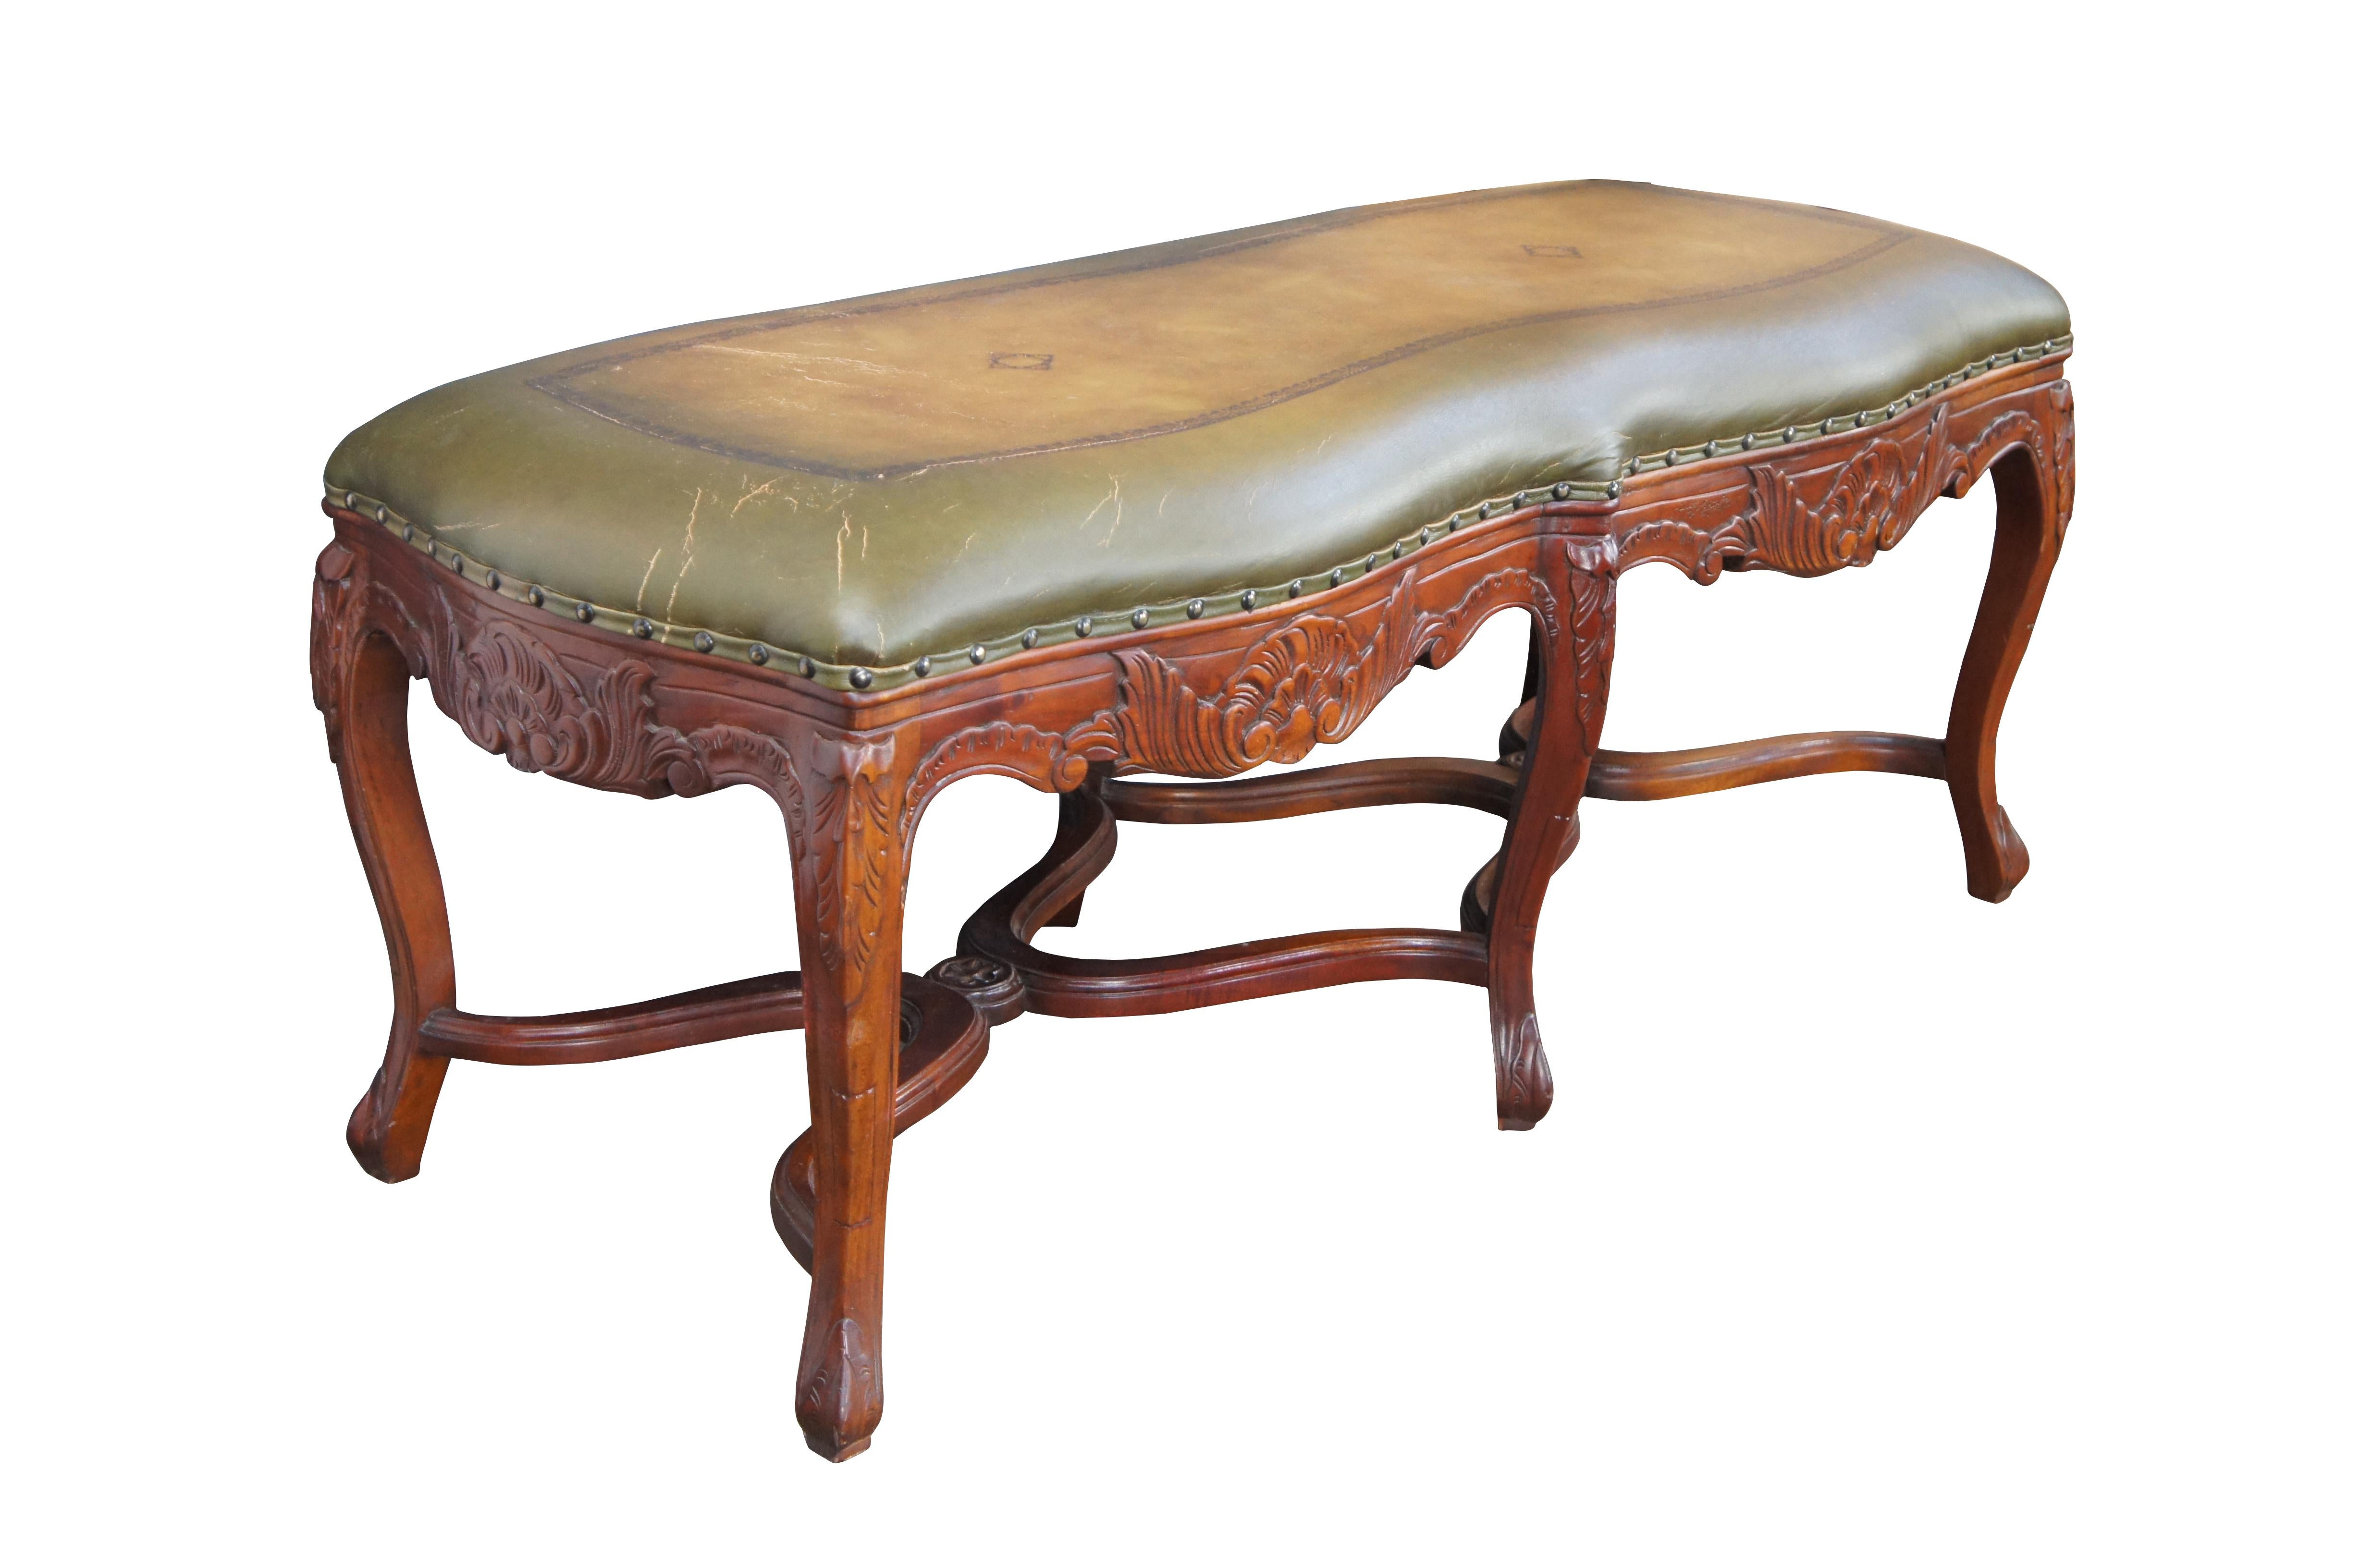 Late 20th Century French inspired foyer / window bench. Features tooled leather green upholstery over carved mahogany frame with cabriole legs and double x form stretchers.

Dimensions:
49